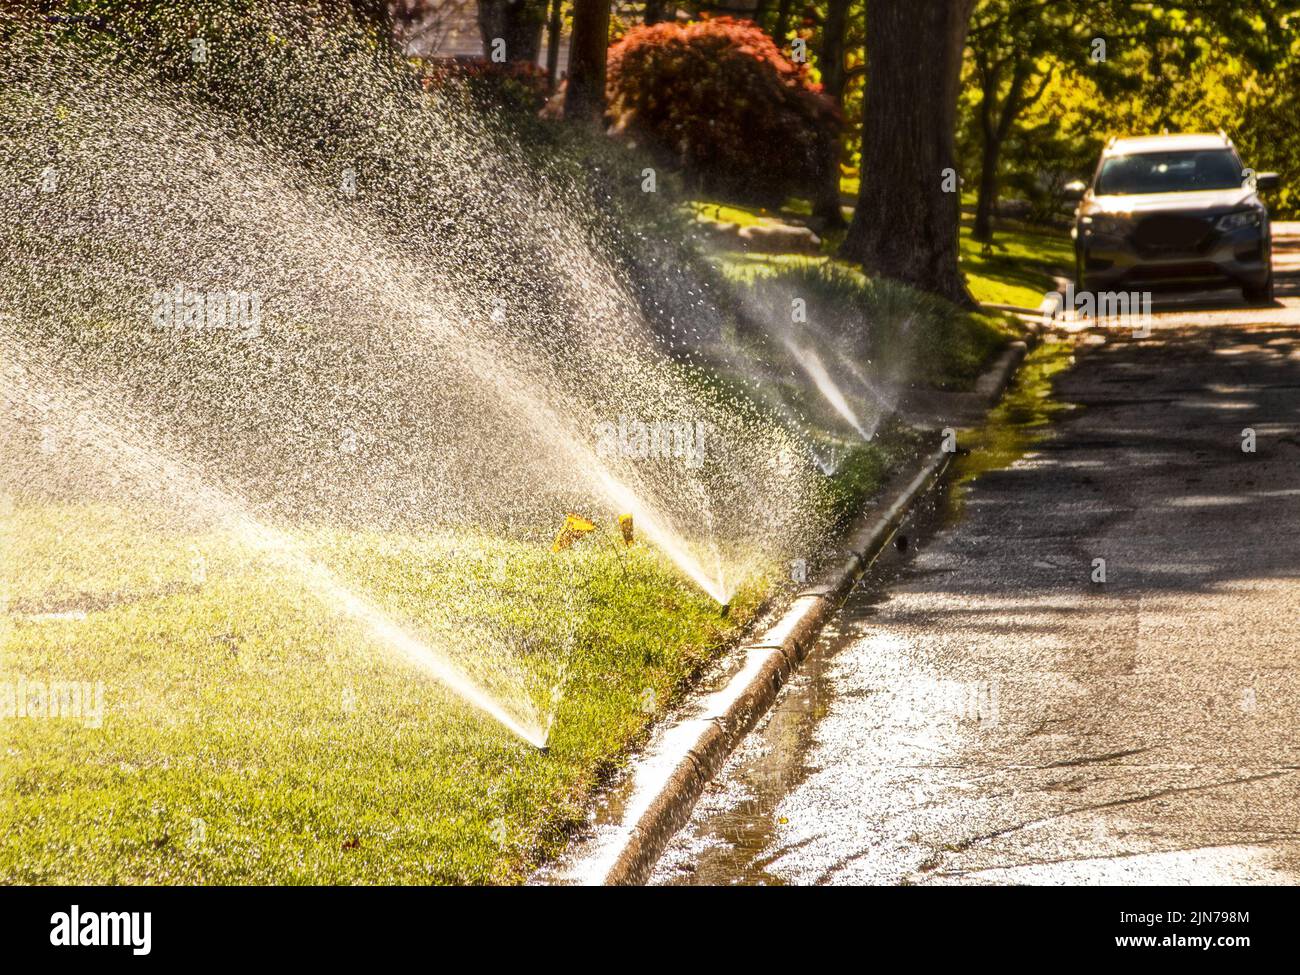 Sprinklers running in residential neighborhood with shady street with car parked in background - selective focus Stock Photo